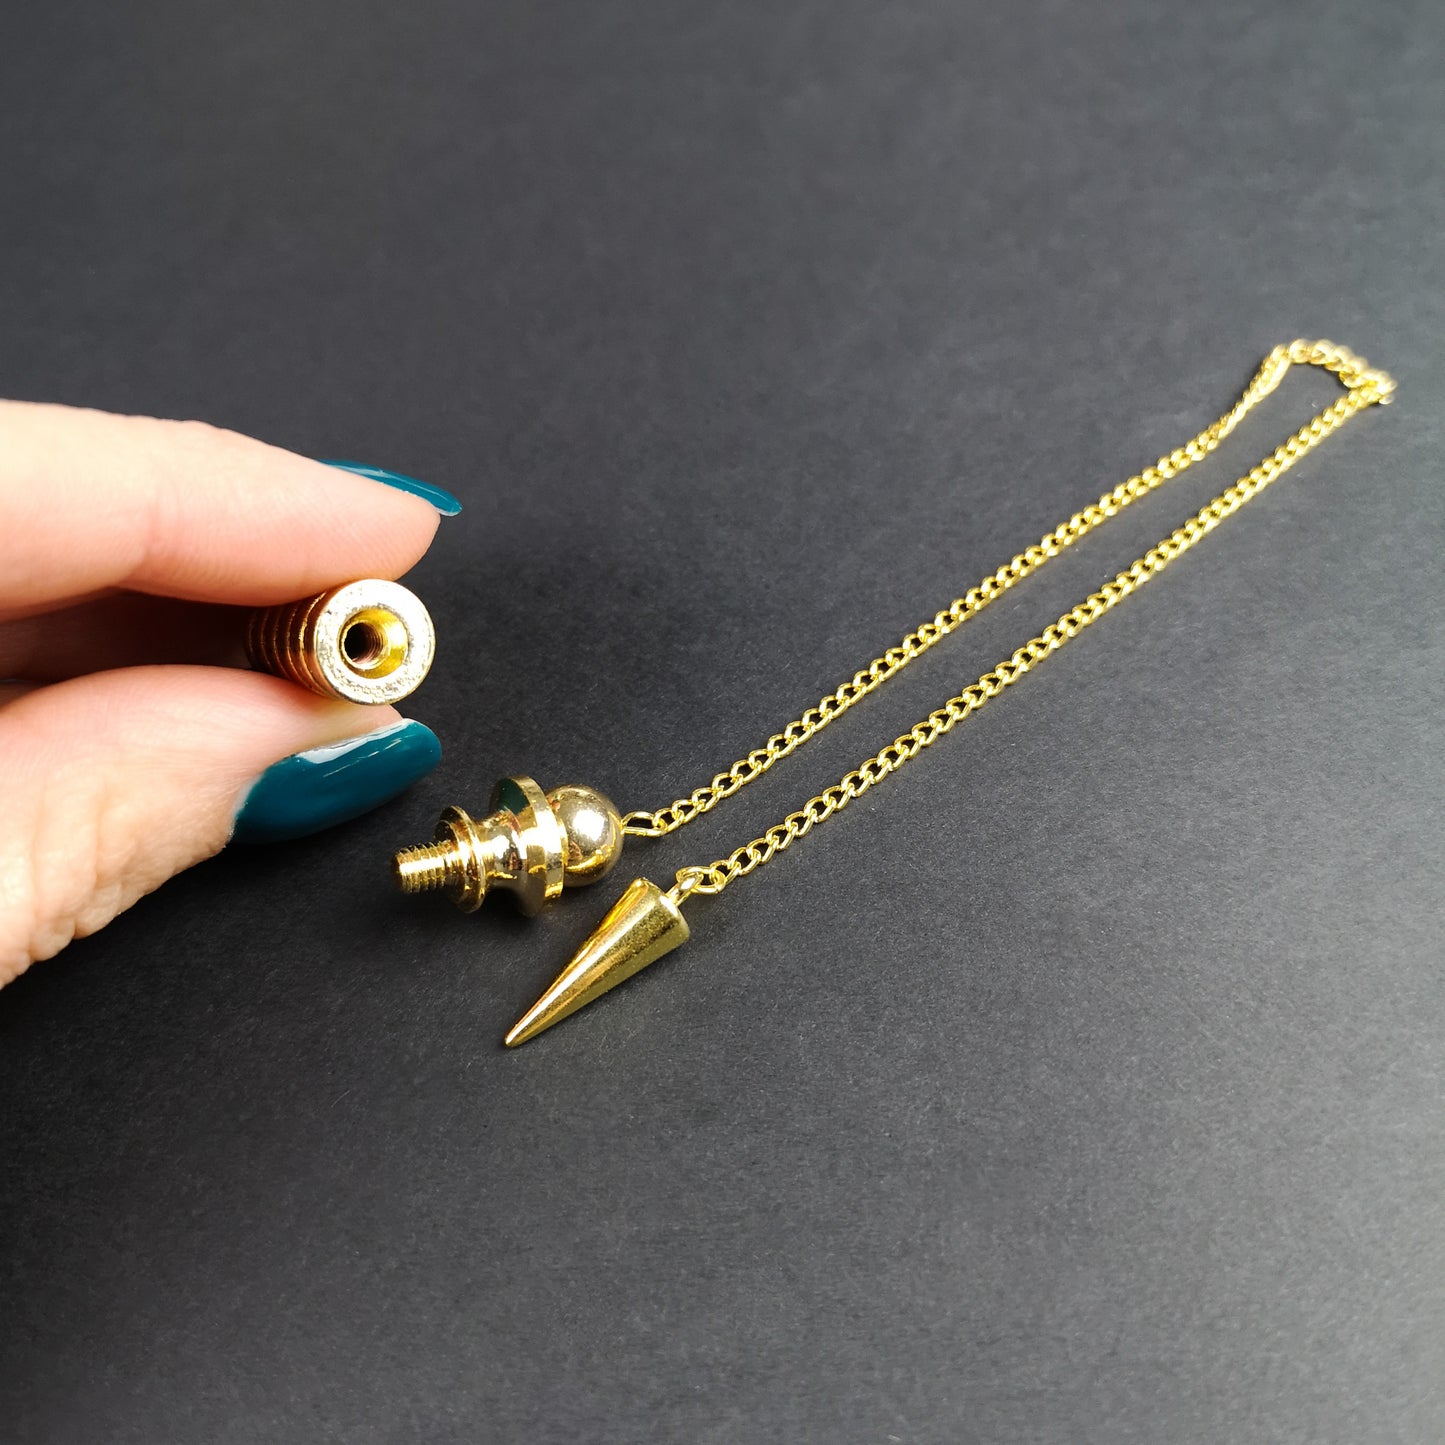 Golden Egyptian Isis dowsing pendulum with a chamber Baguette Magick